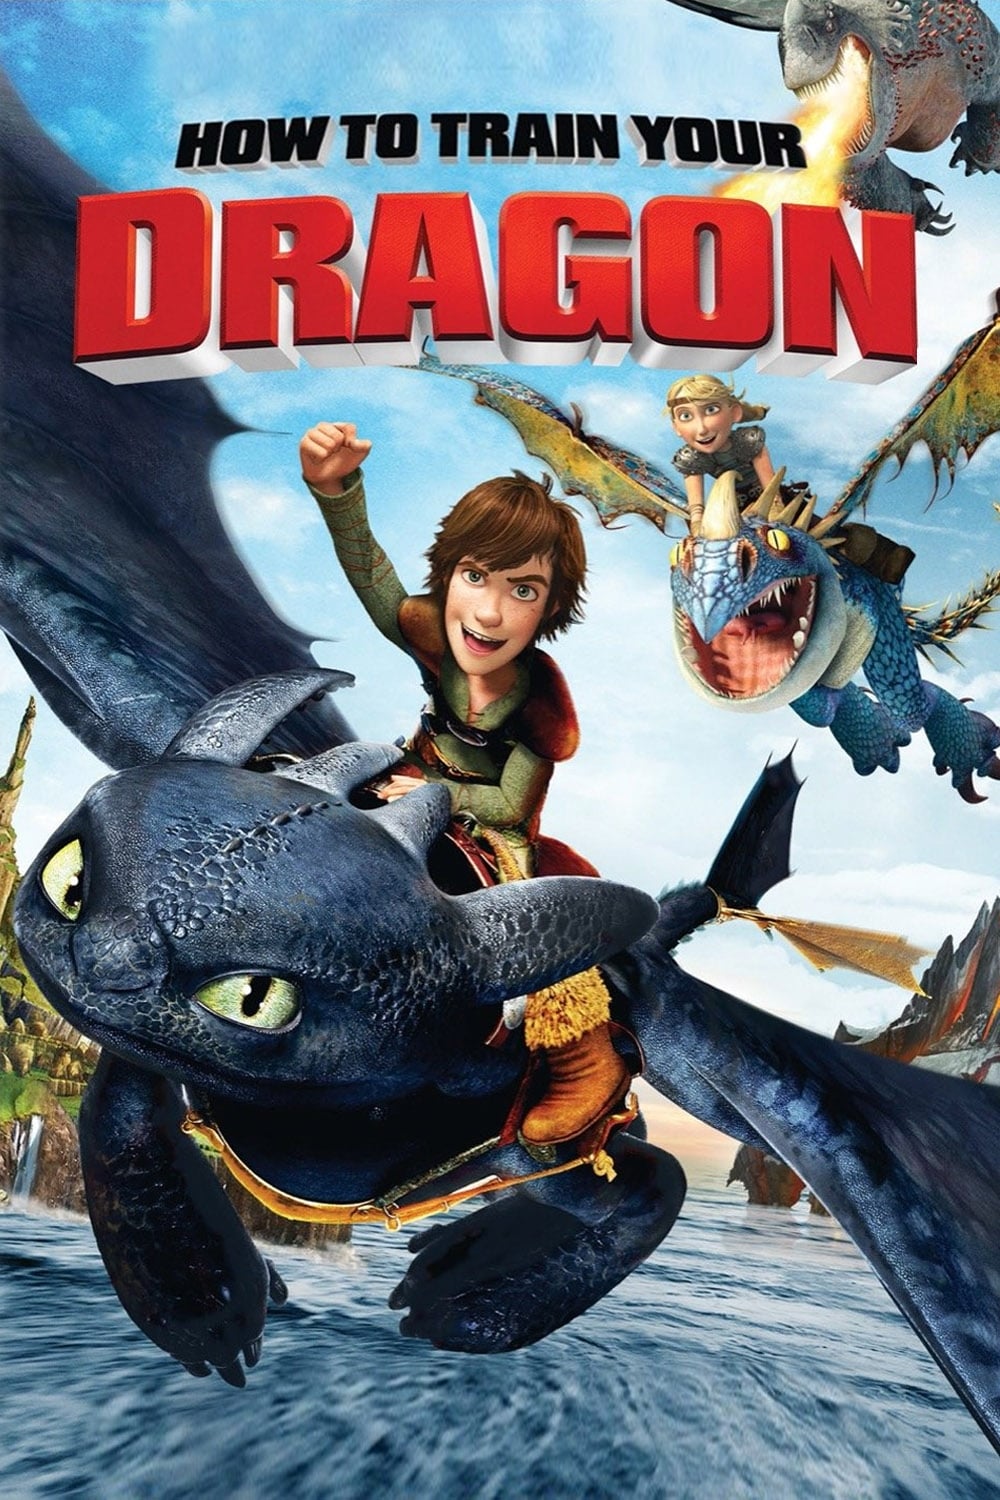 How to Train Your Dragon (2010) | Watchrs Club